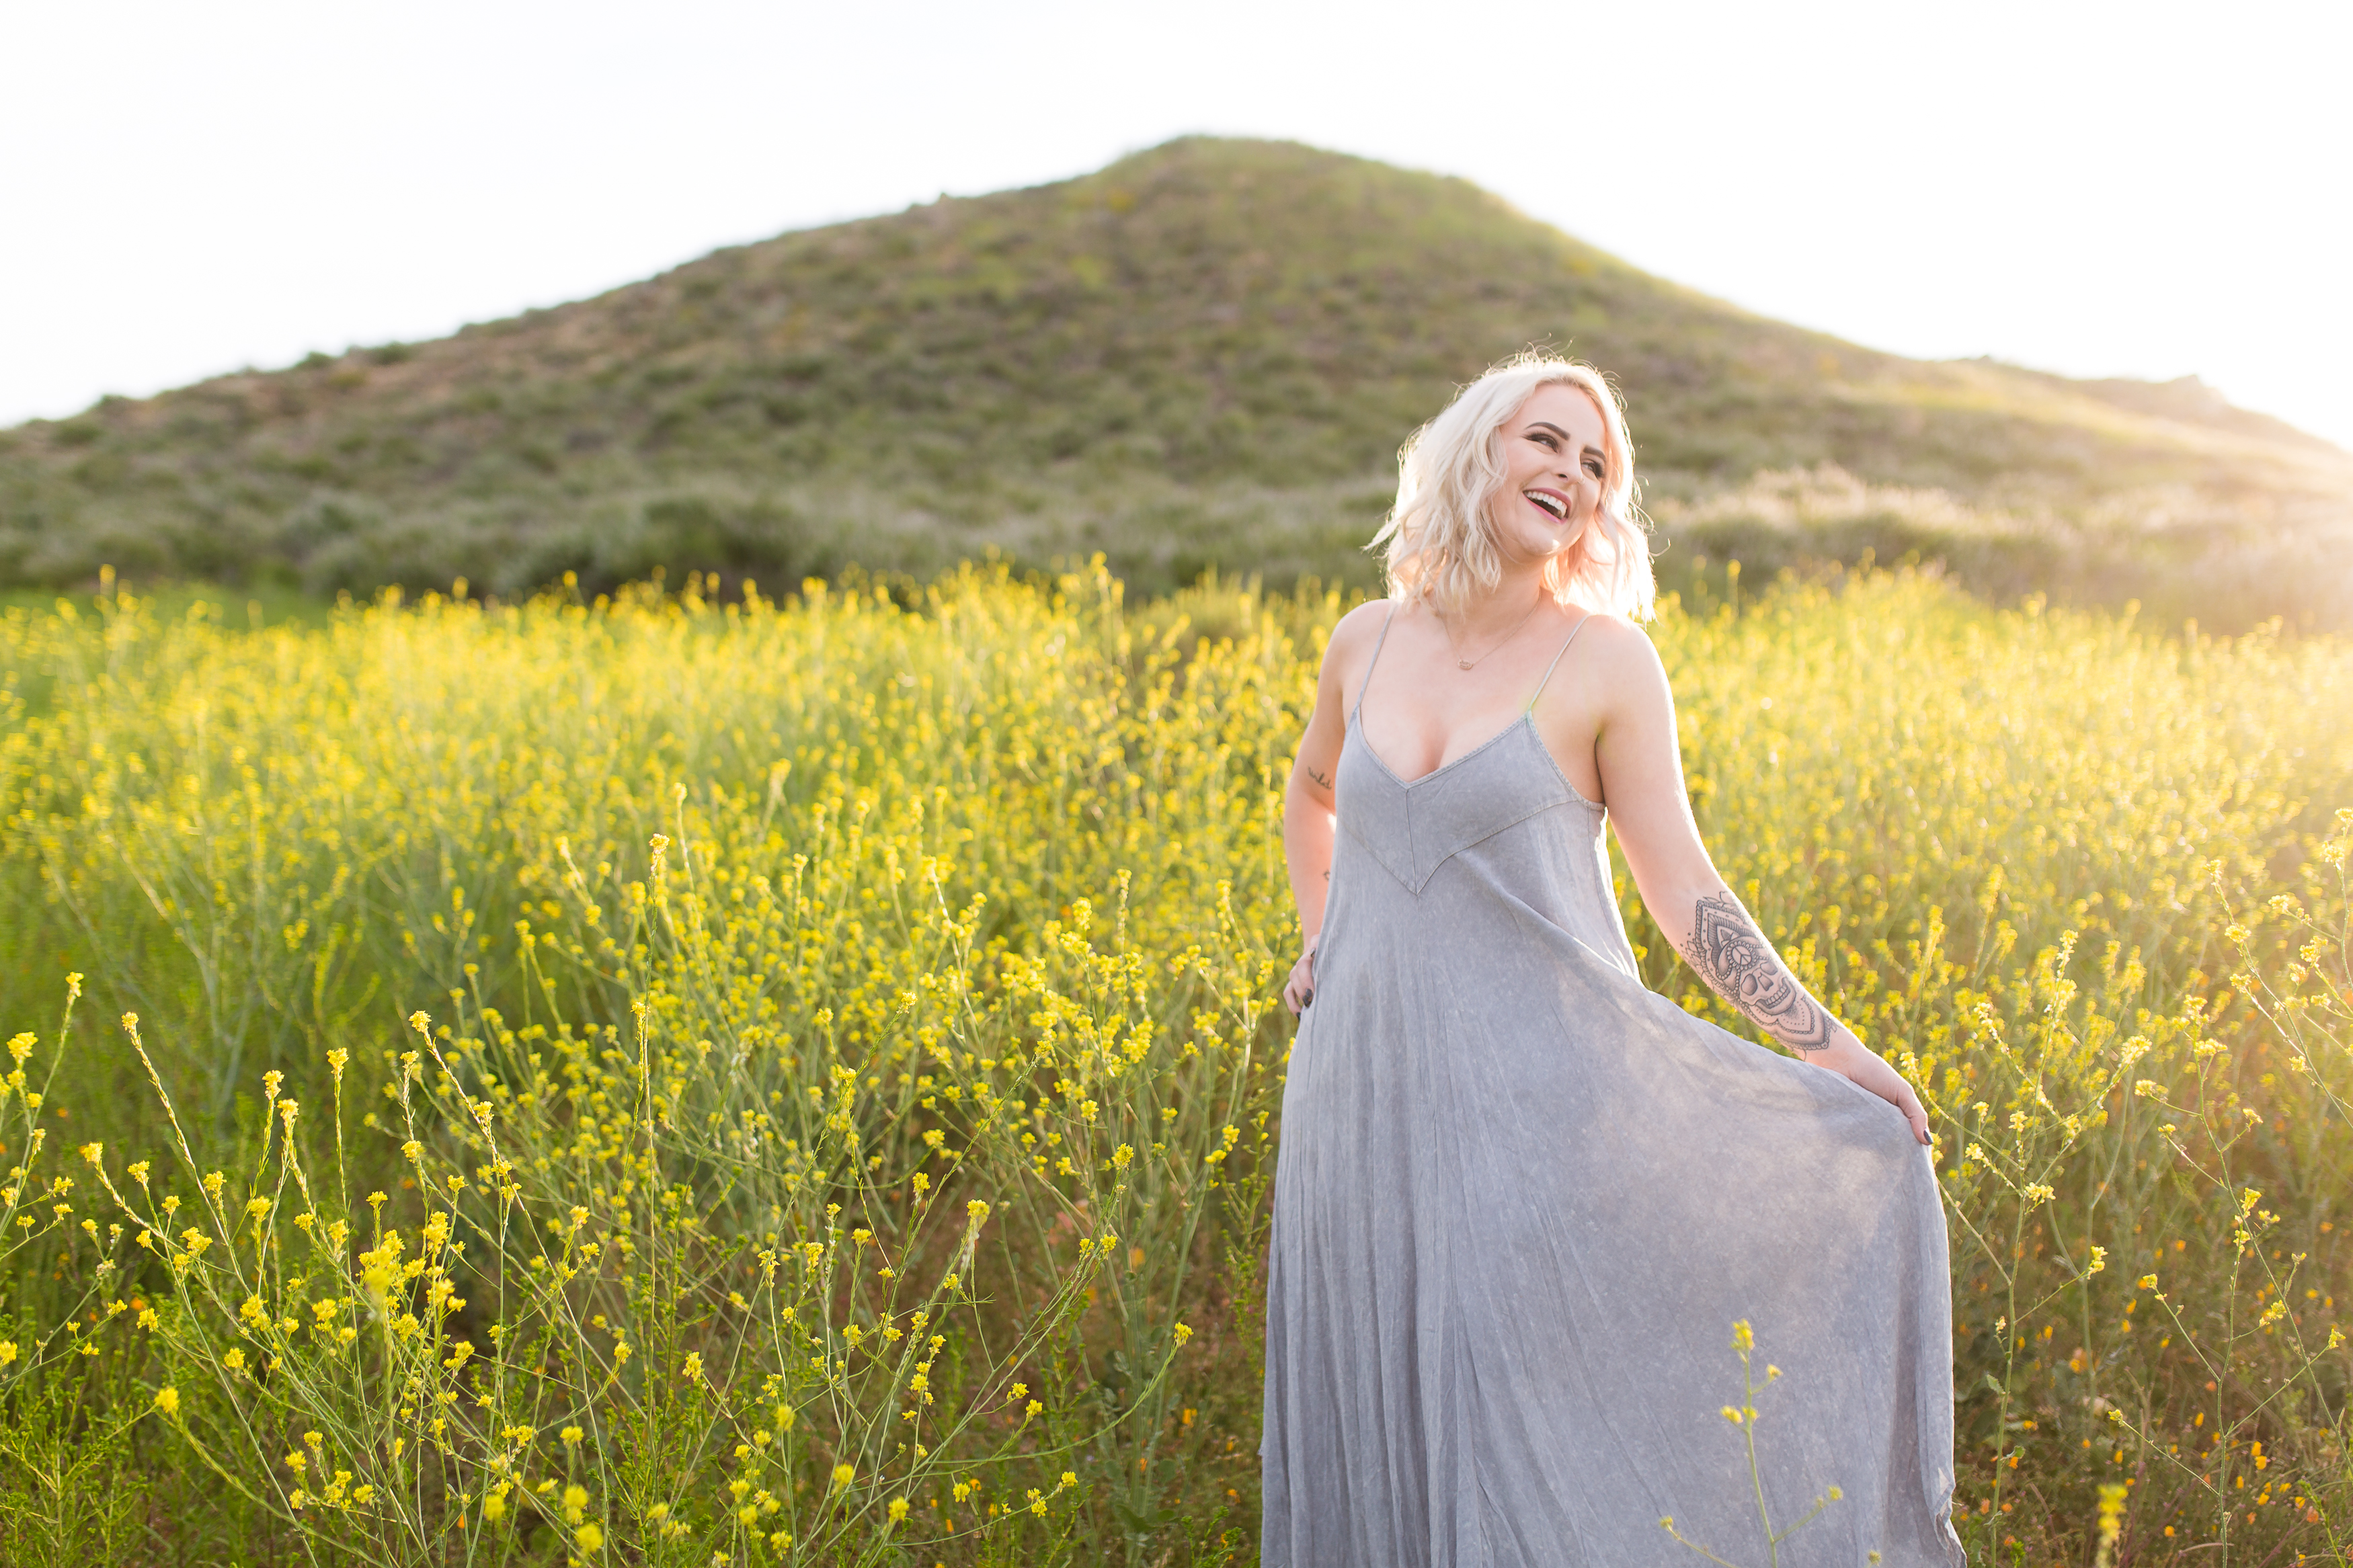 Blonde woman laughing in field of poppies by green hill at sunrise